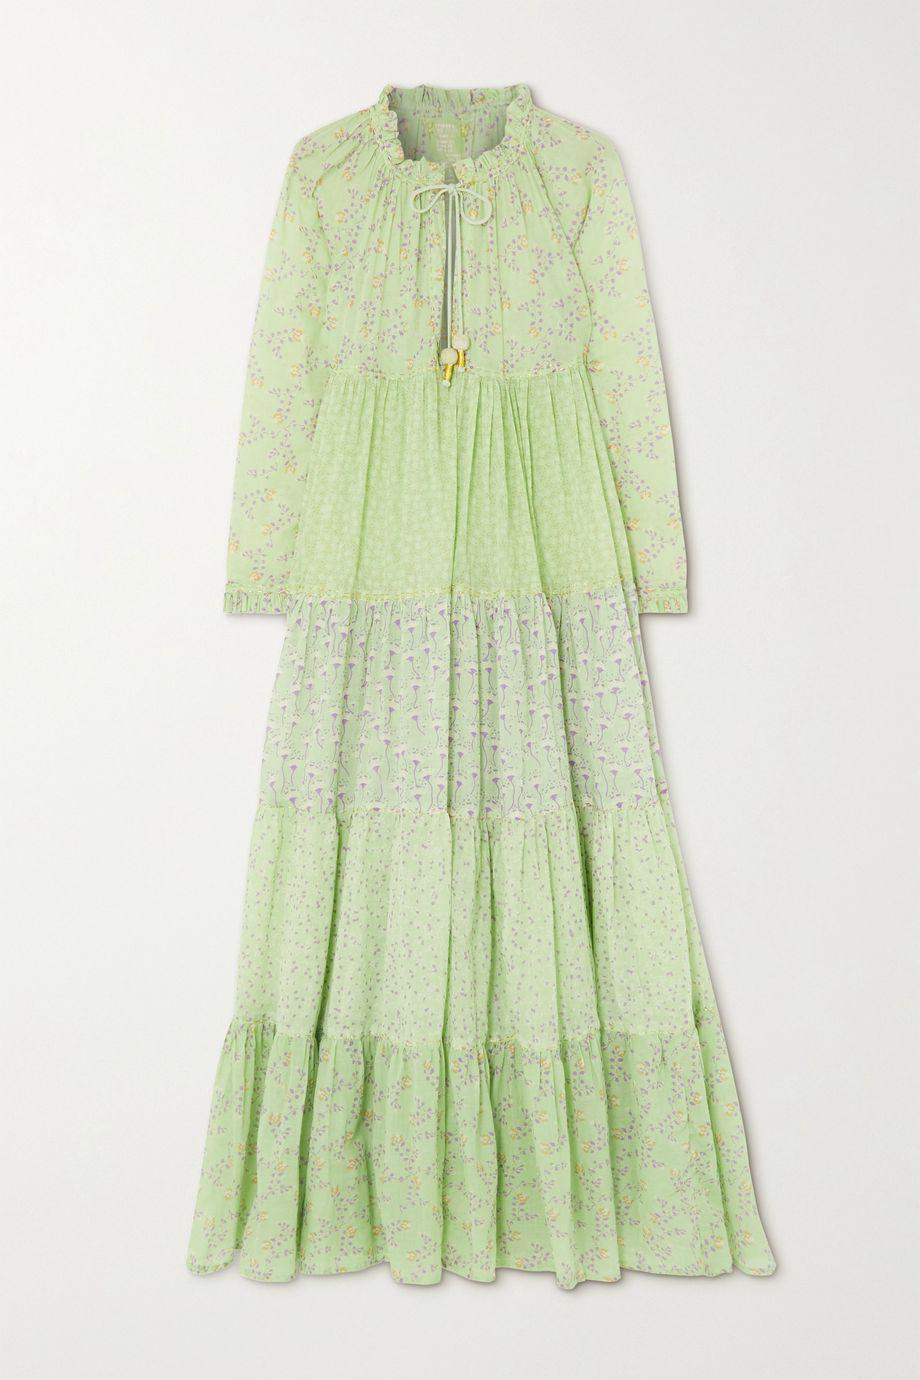 Hippy tiered printed cotton-voile maxi dress by YVONNE S